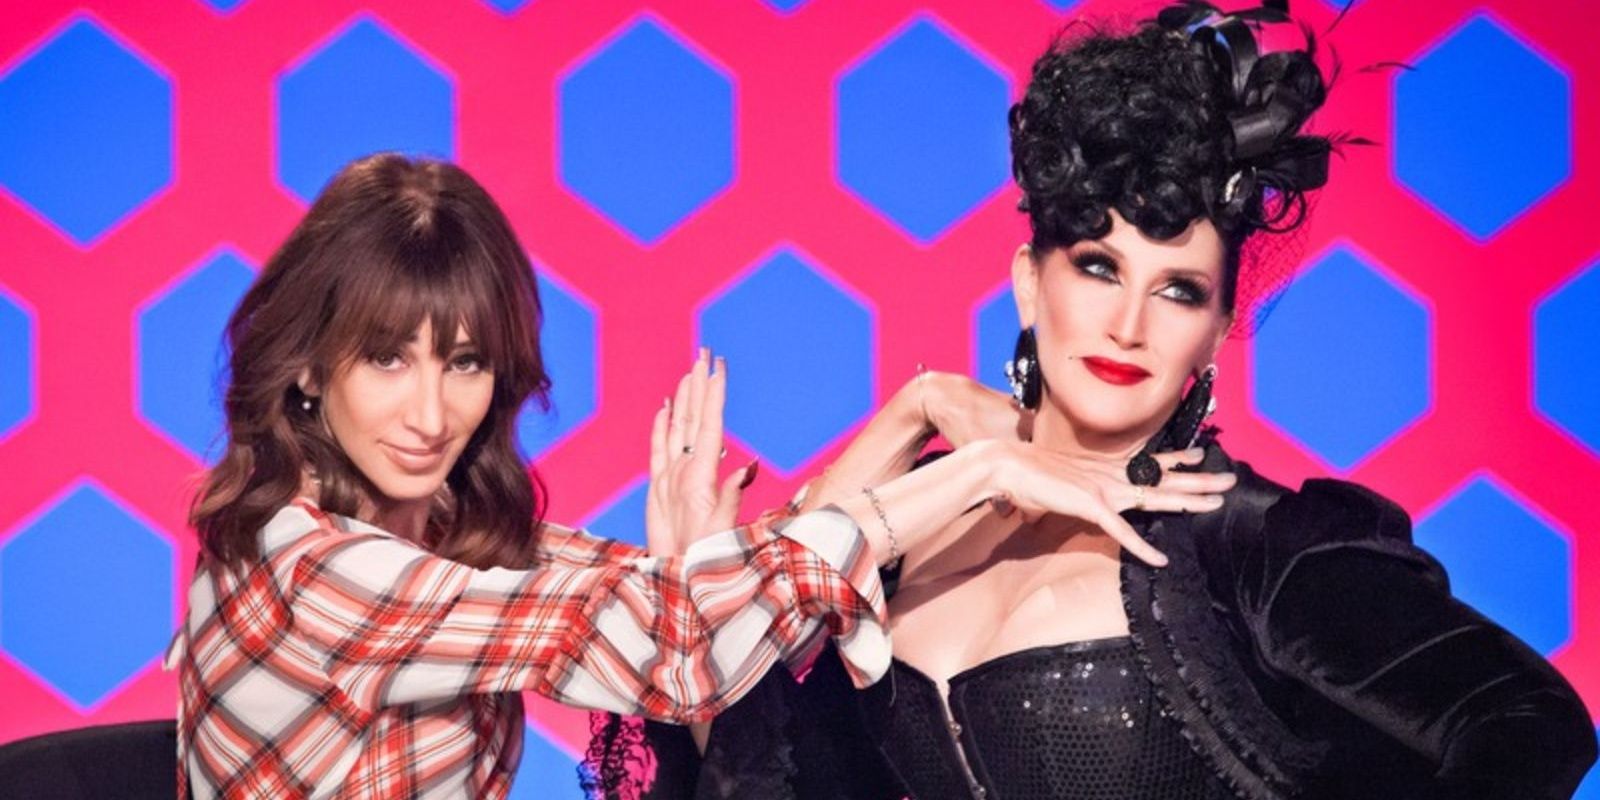 Merle Ginsberg and Michelle Visage pose together behind the judges table on RuPaul's Drag Race